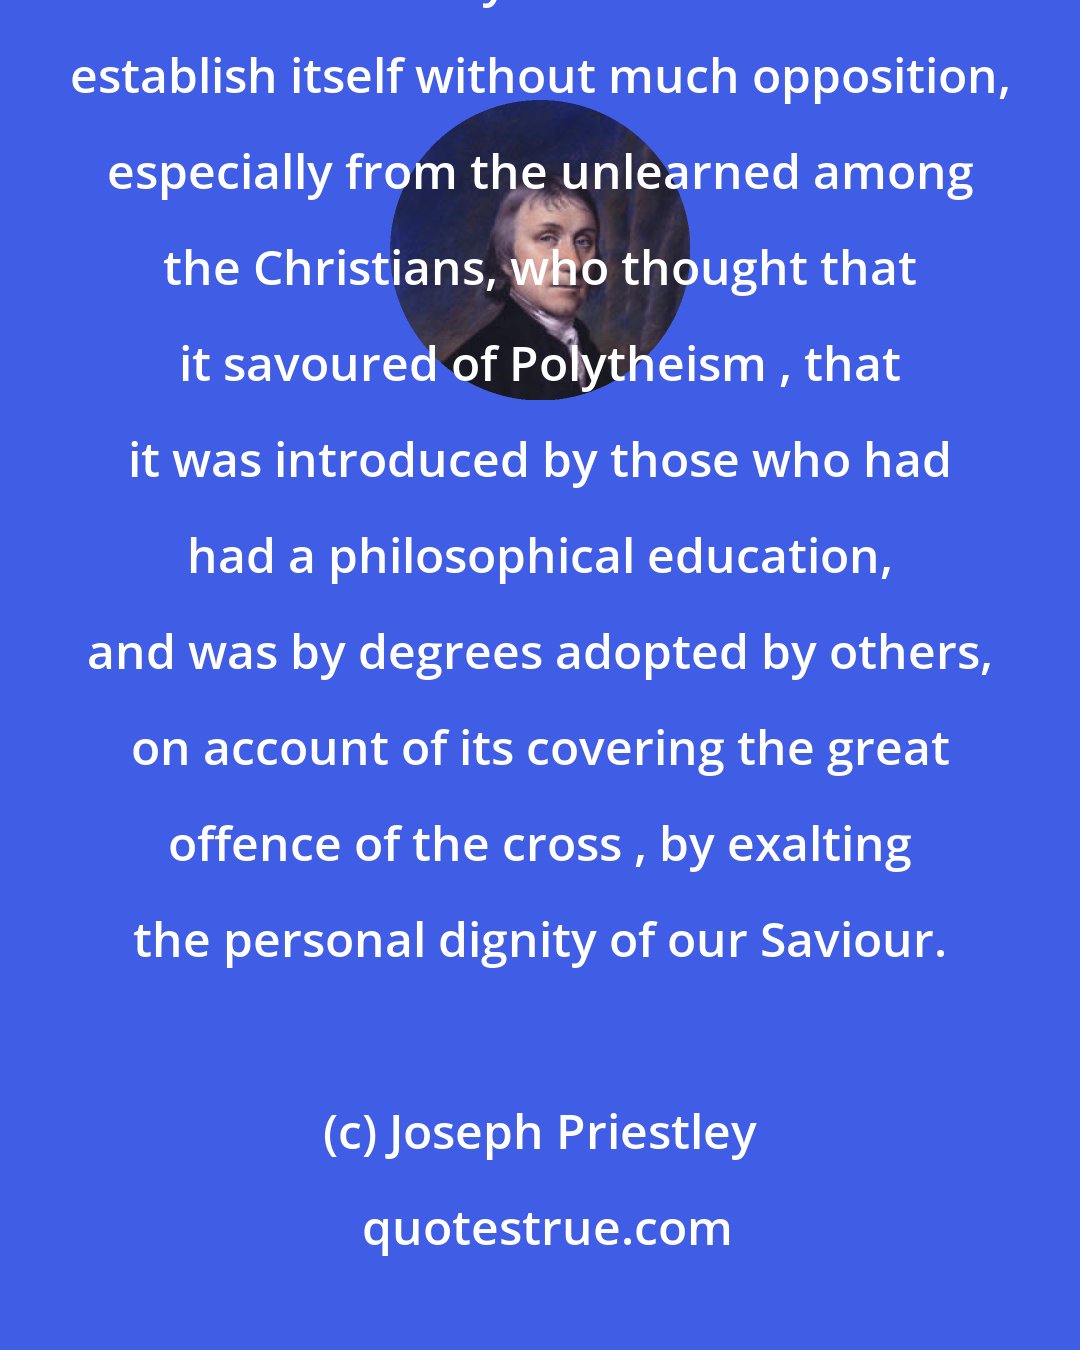 Joseph Priestley: It is sufficiently evident from many circumstances, that the doctrine of the divinity of Christ did not establish itself without much opposition, especially from the unlearned among the Christians, who thought that it savoured of Polytheism , that it was introduced by those who had had a philosophical education, and was by degrees adopted by others, on account of its covering the great offence of the cross , by exalting the personal dignity of our Saviour.